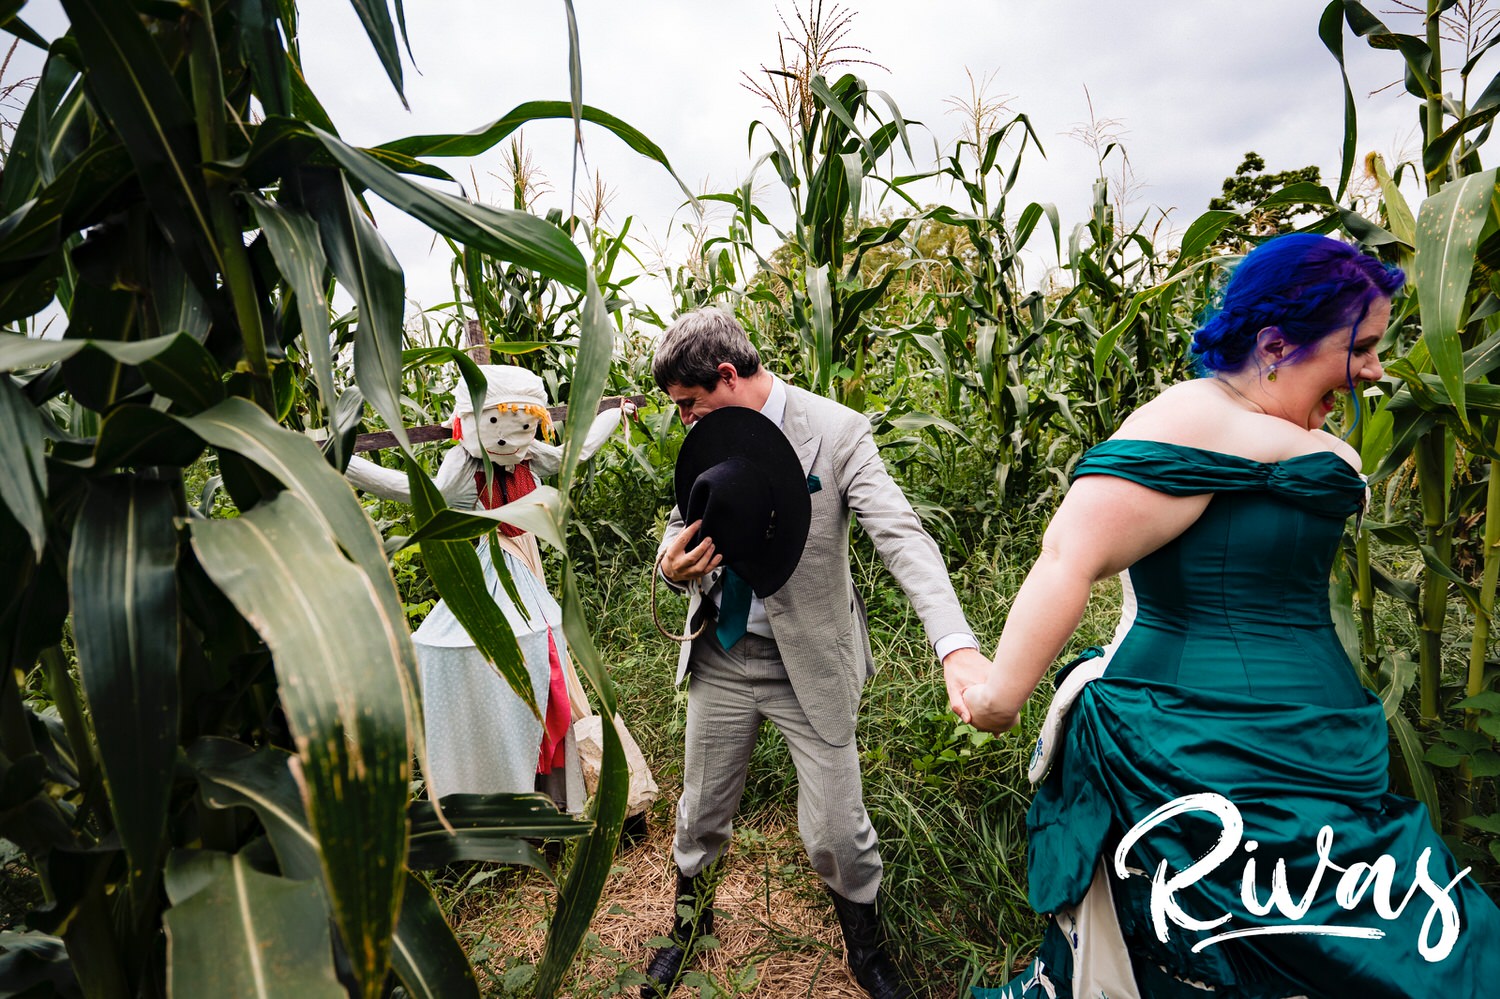 A candid picture of a bride and groom running through a cornfield on their wedding day. 